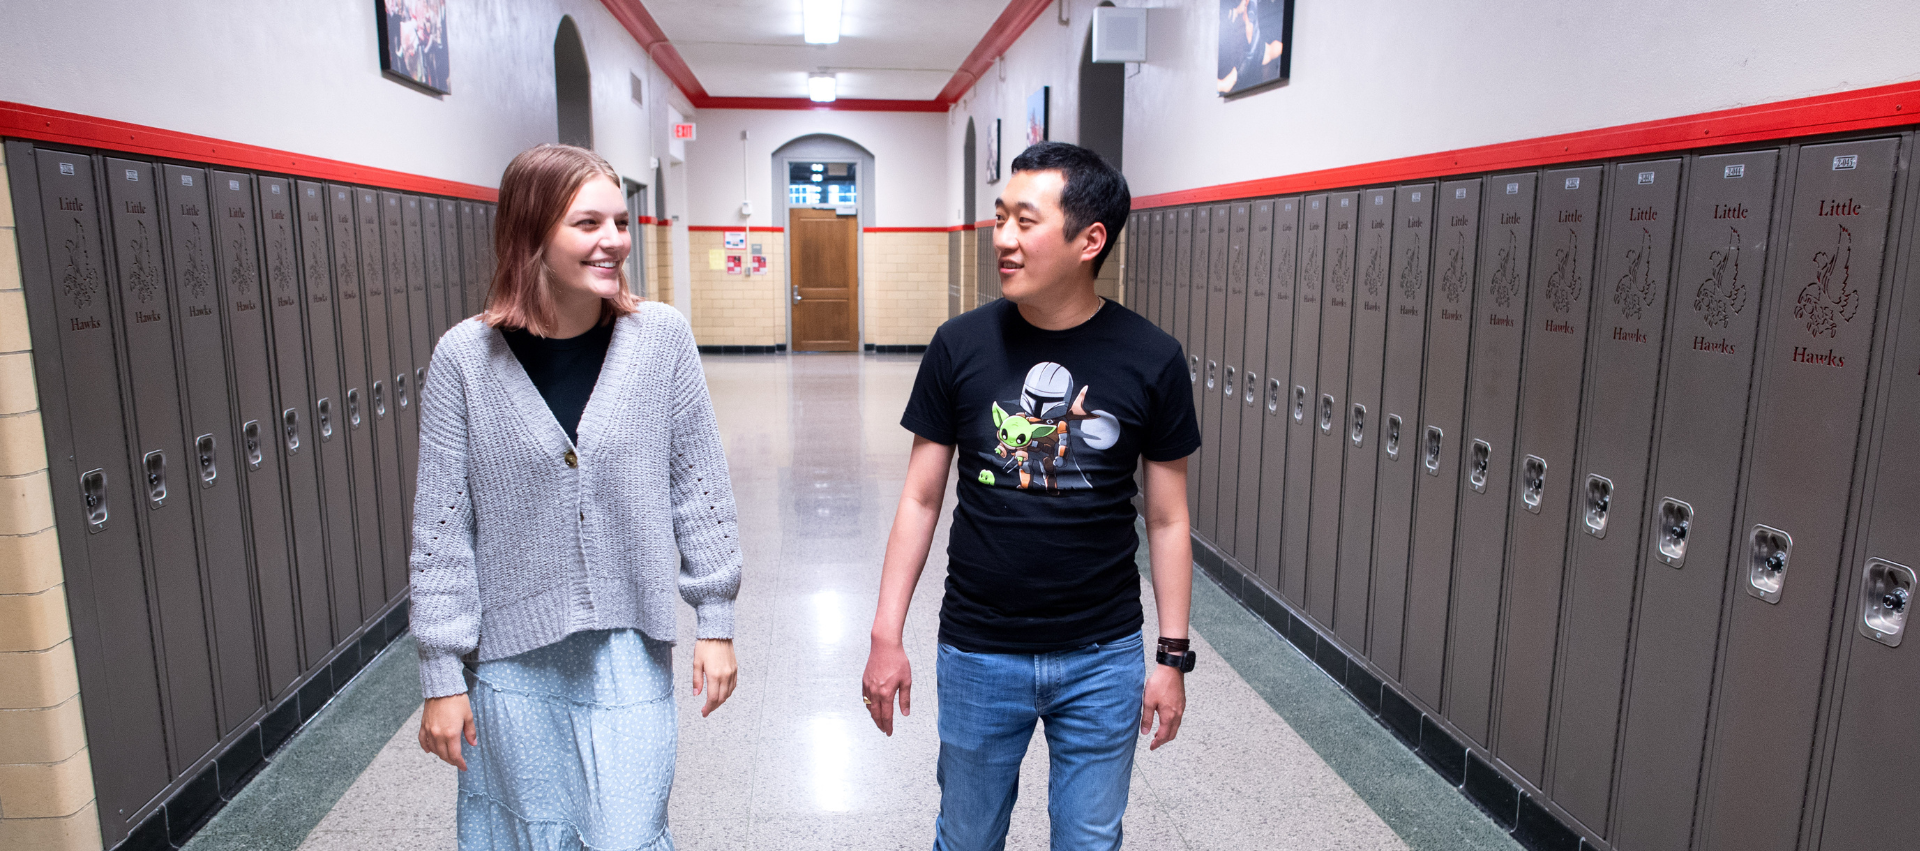 Image: Student and teacher walking in hallway